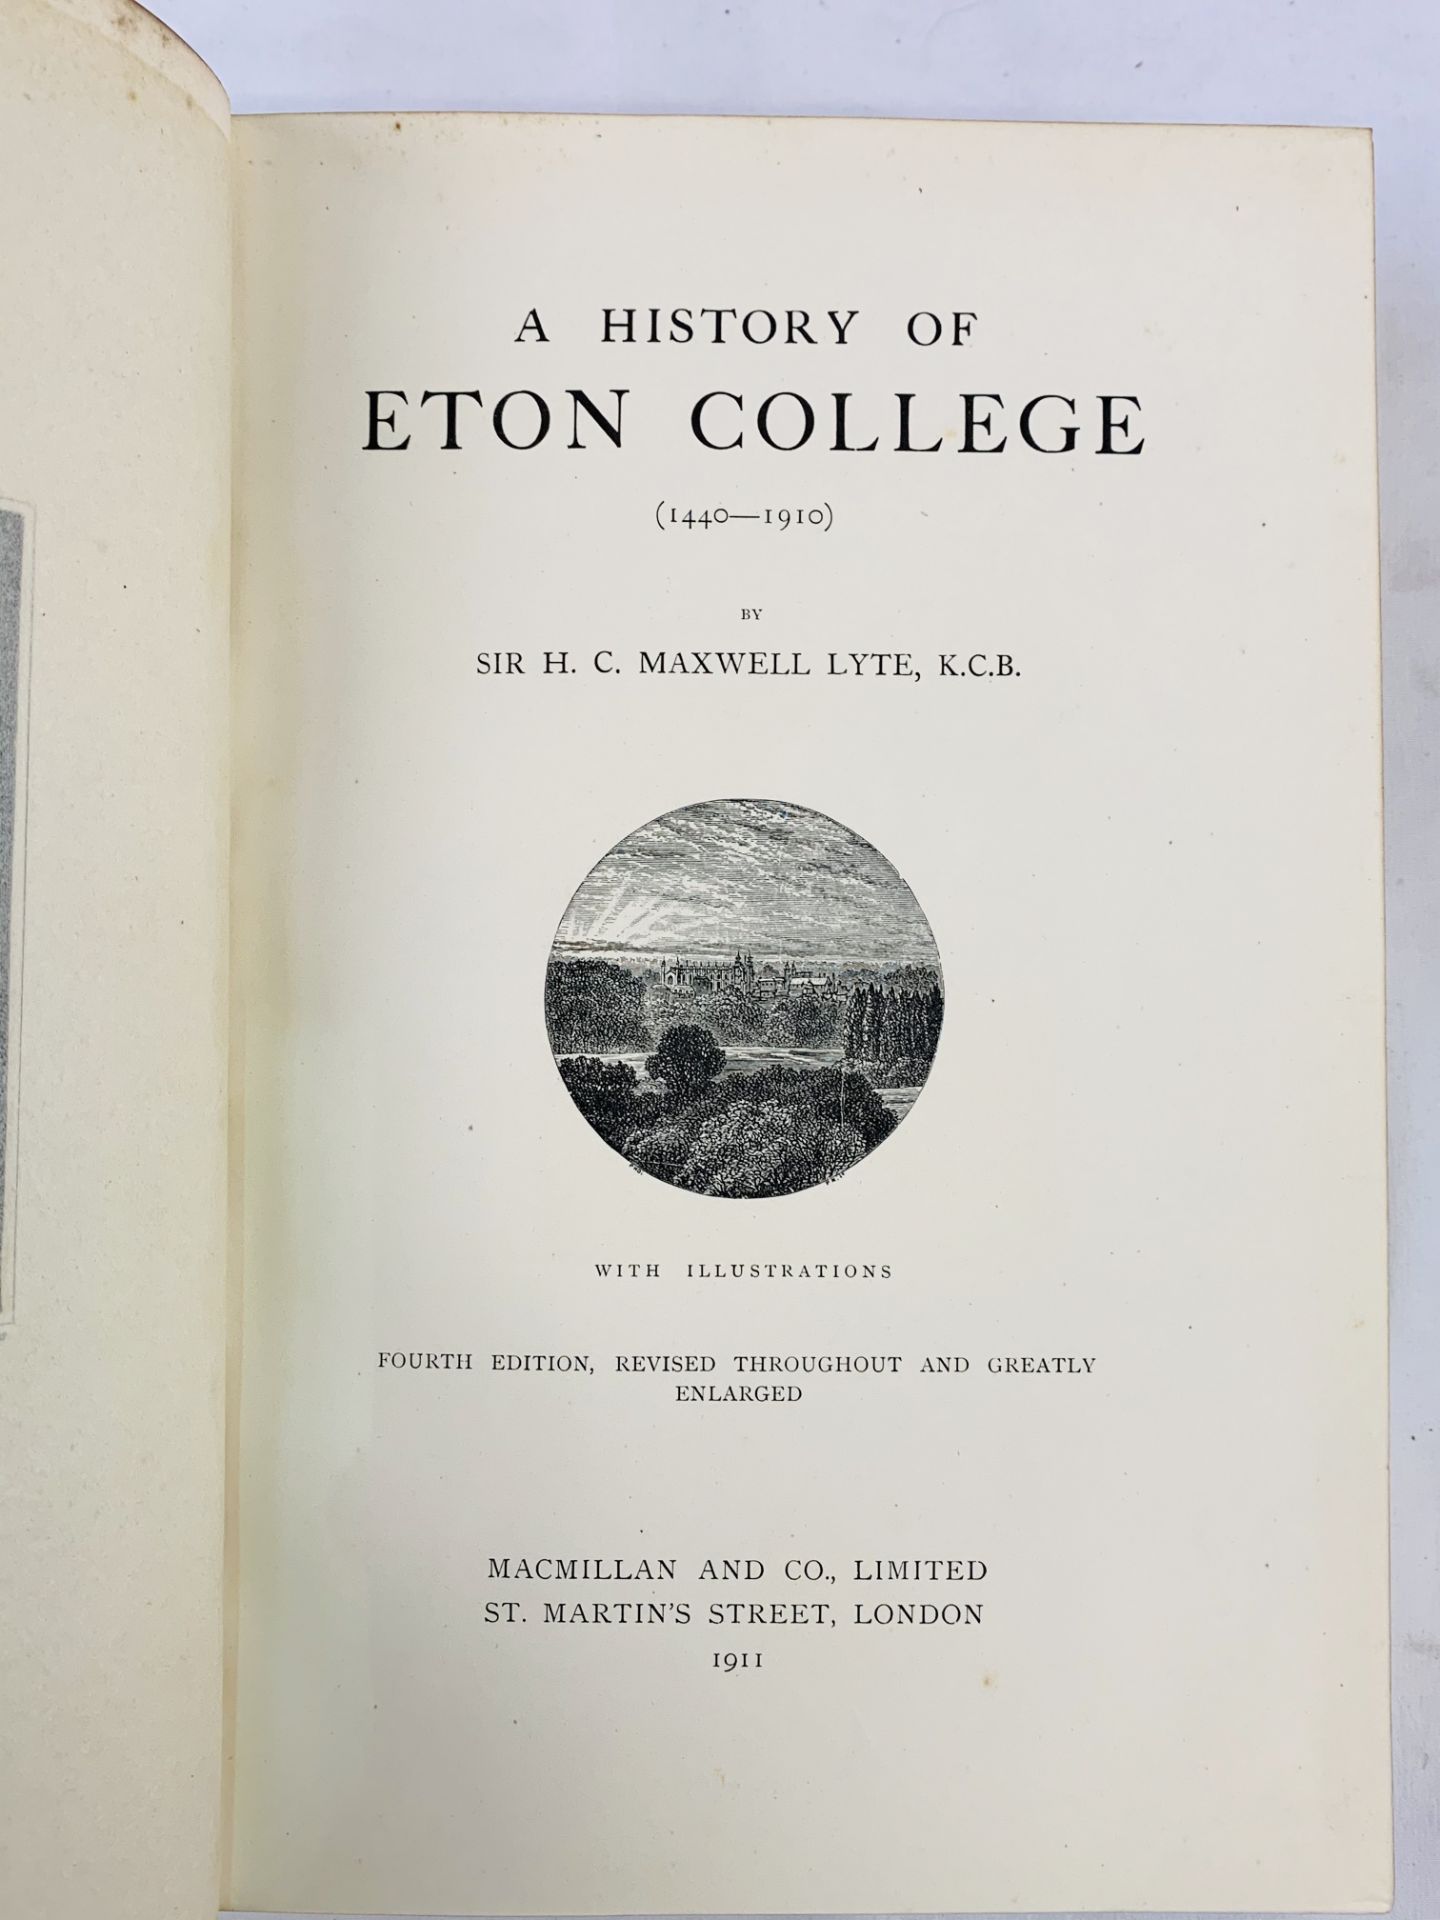 A History of Eton College 1440-1910 by Sir H C Maxwell Lyte, pub. Macmillan & Co., 1911. - Image 2 of 5